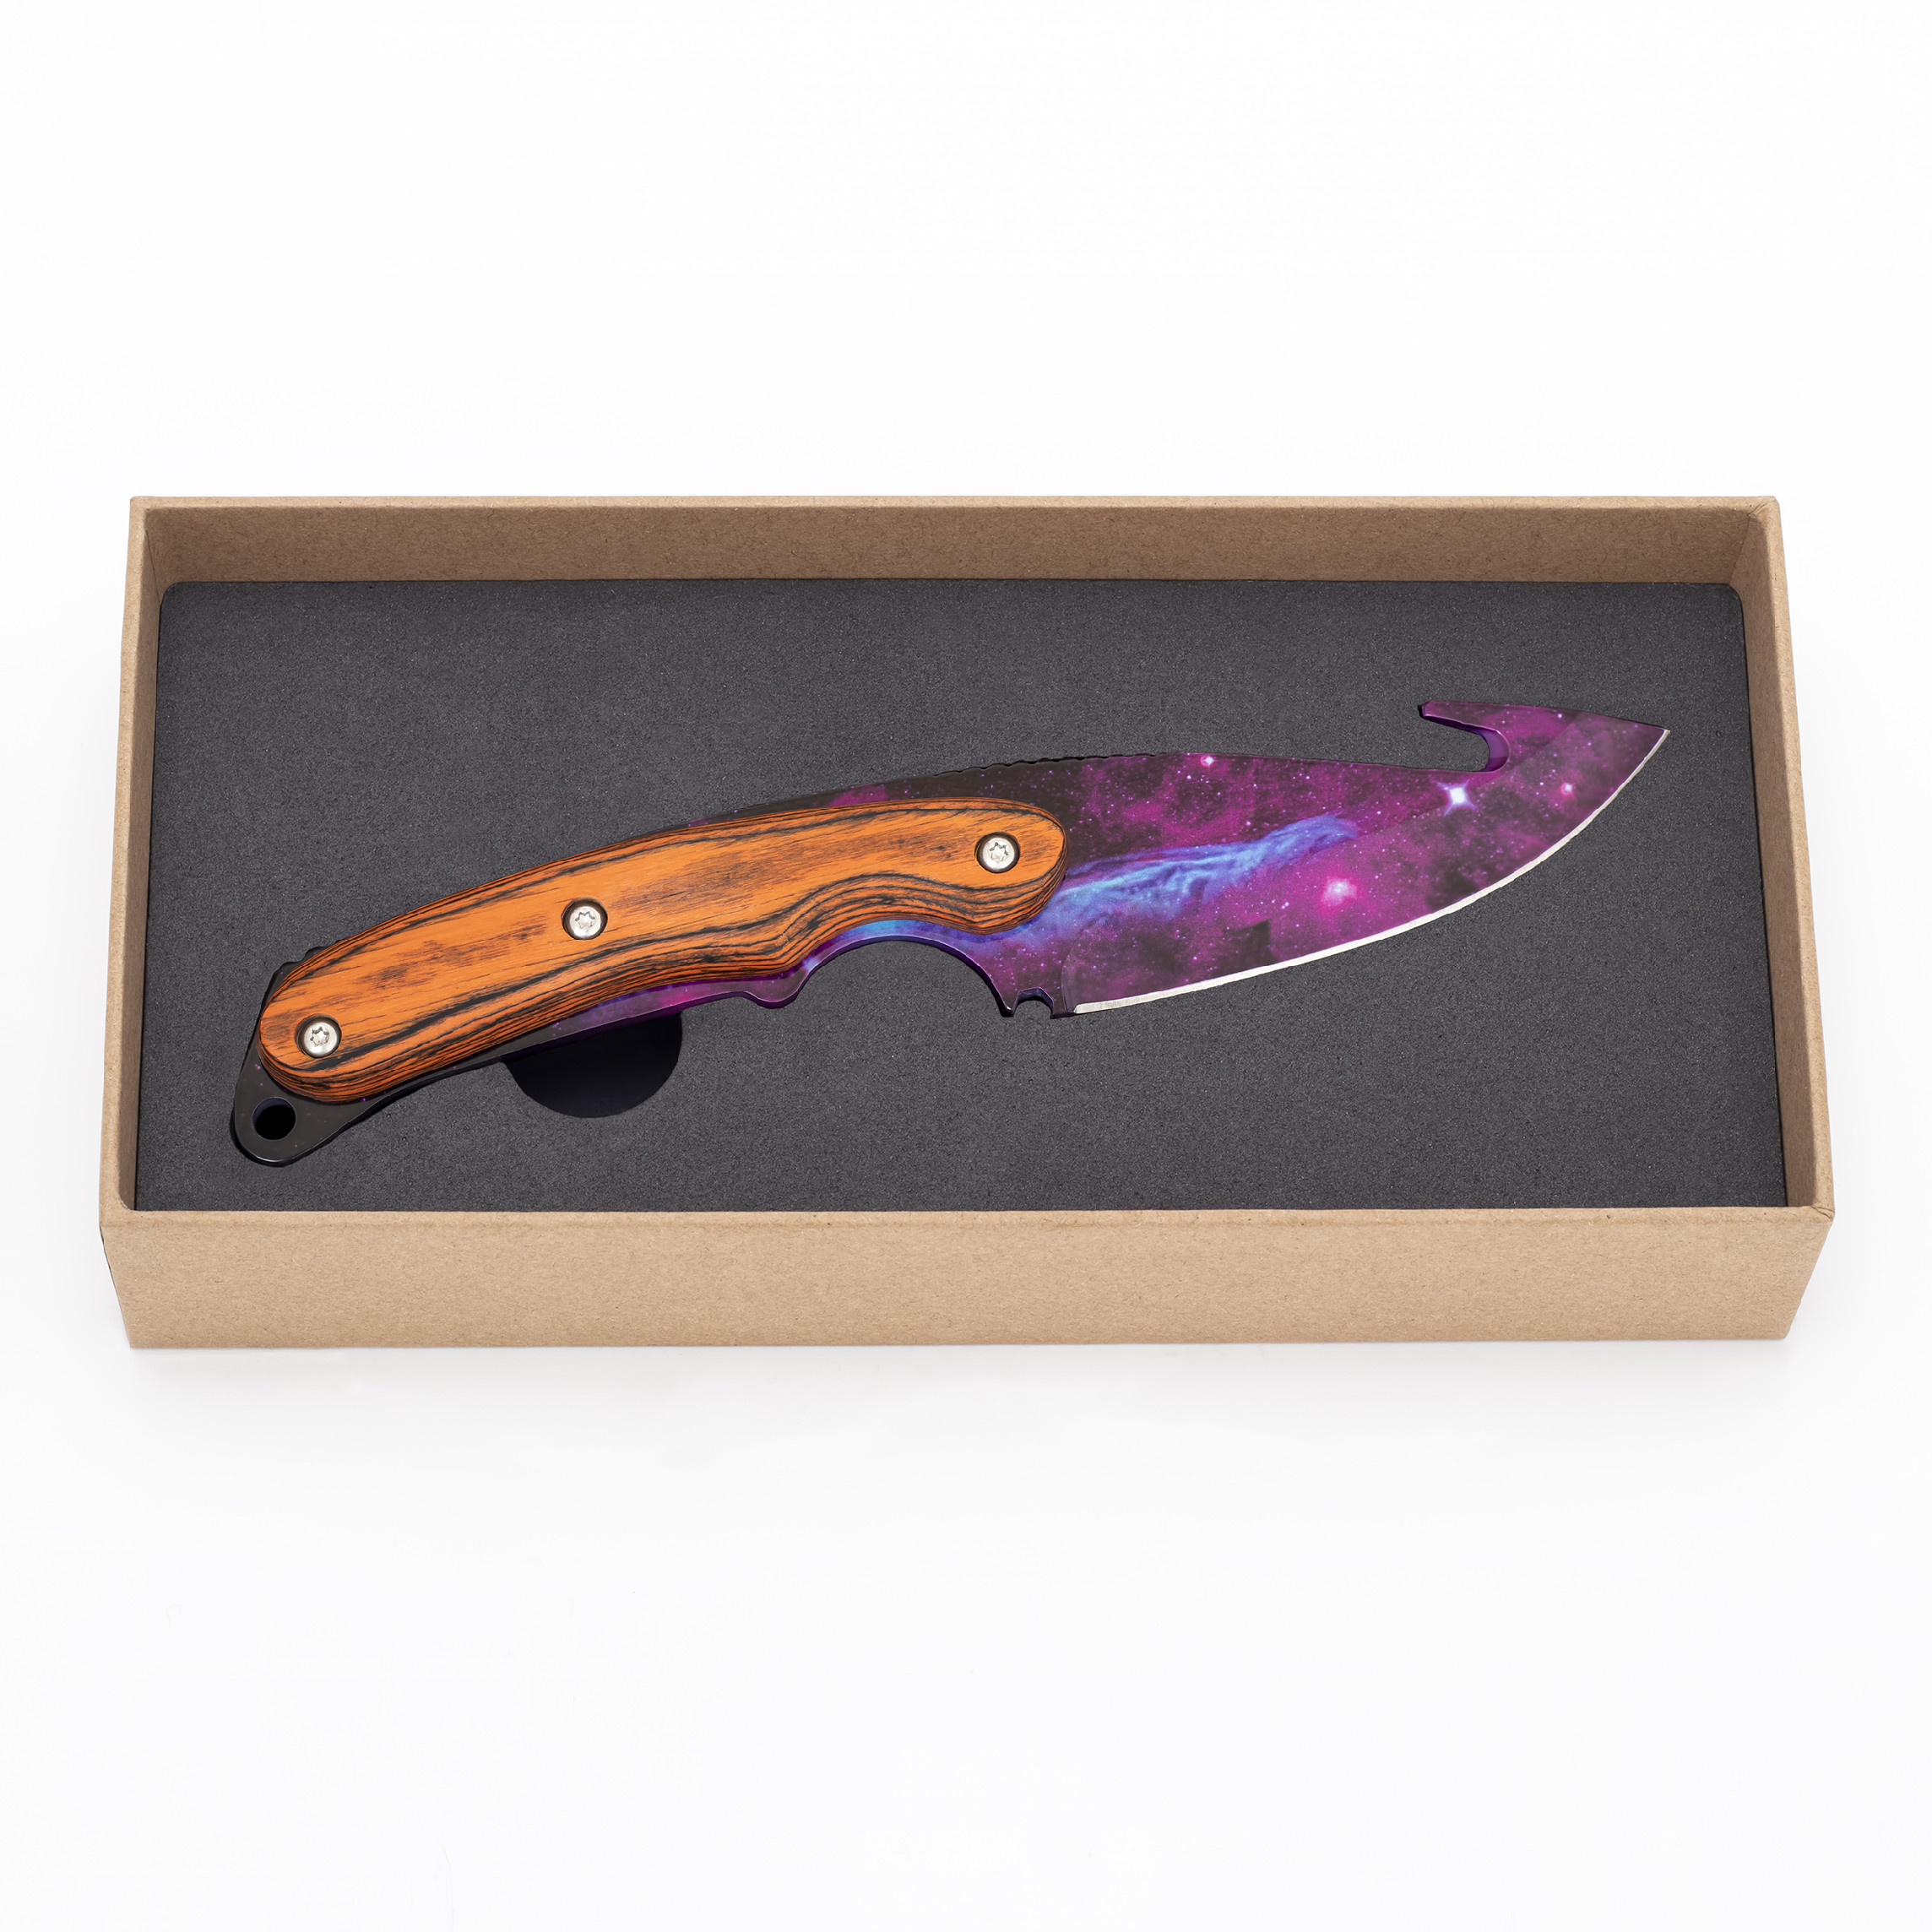 The Galaxy Knife Collection